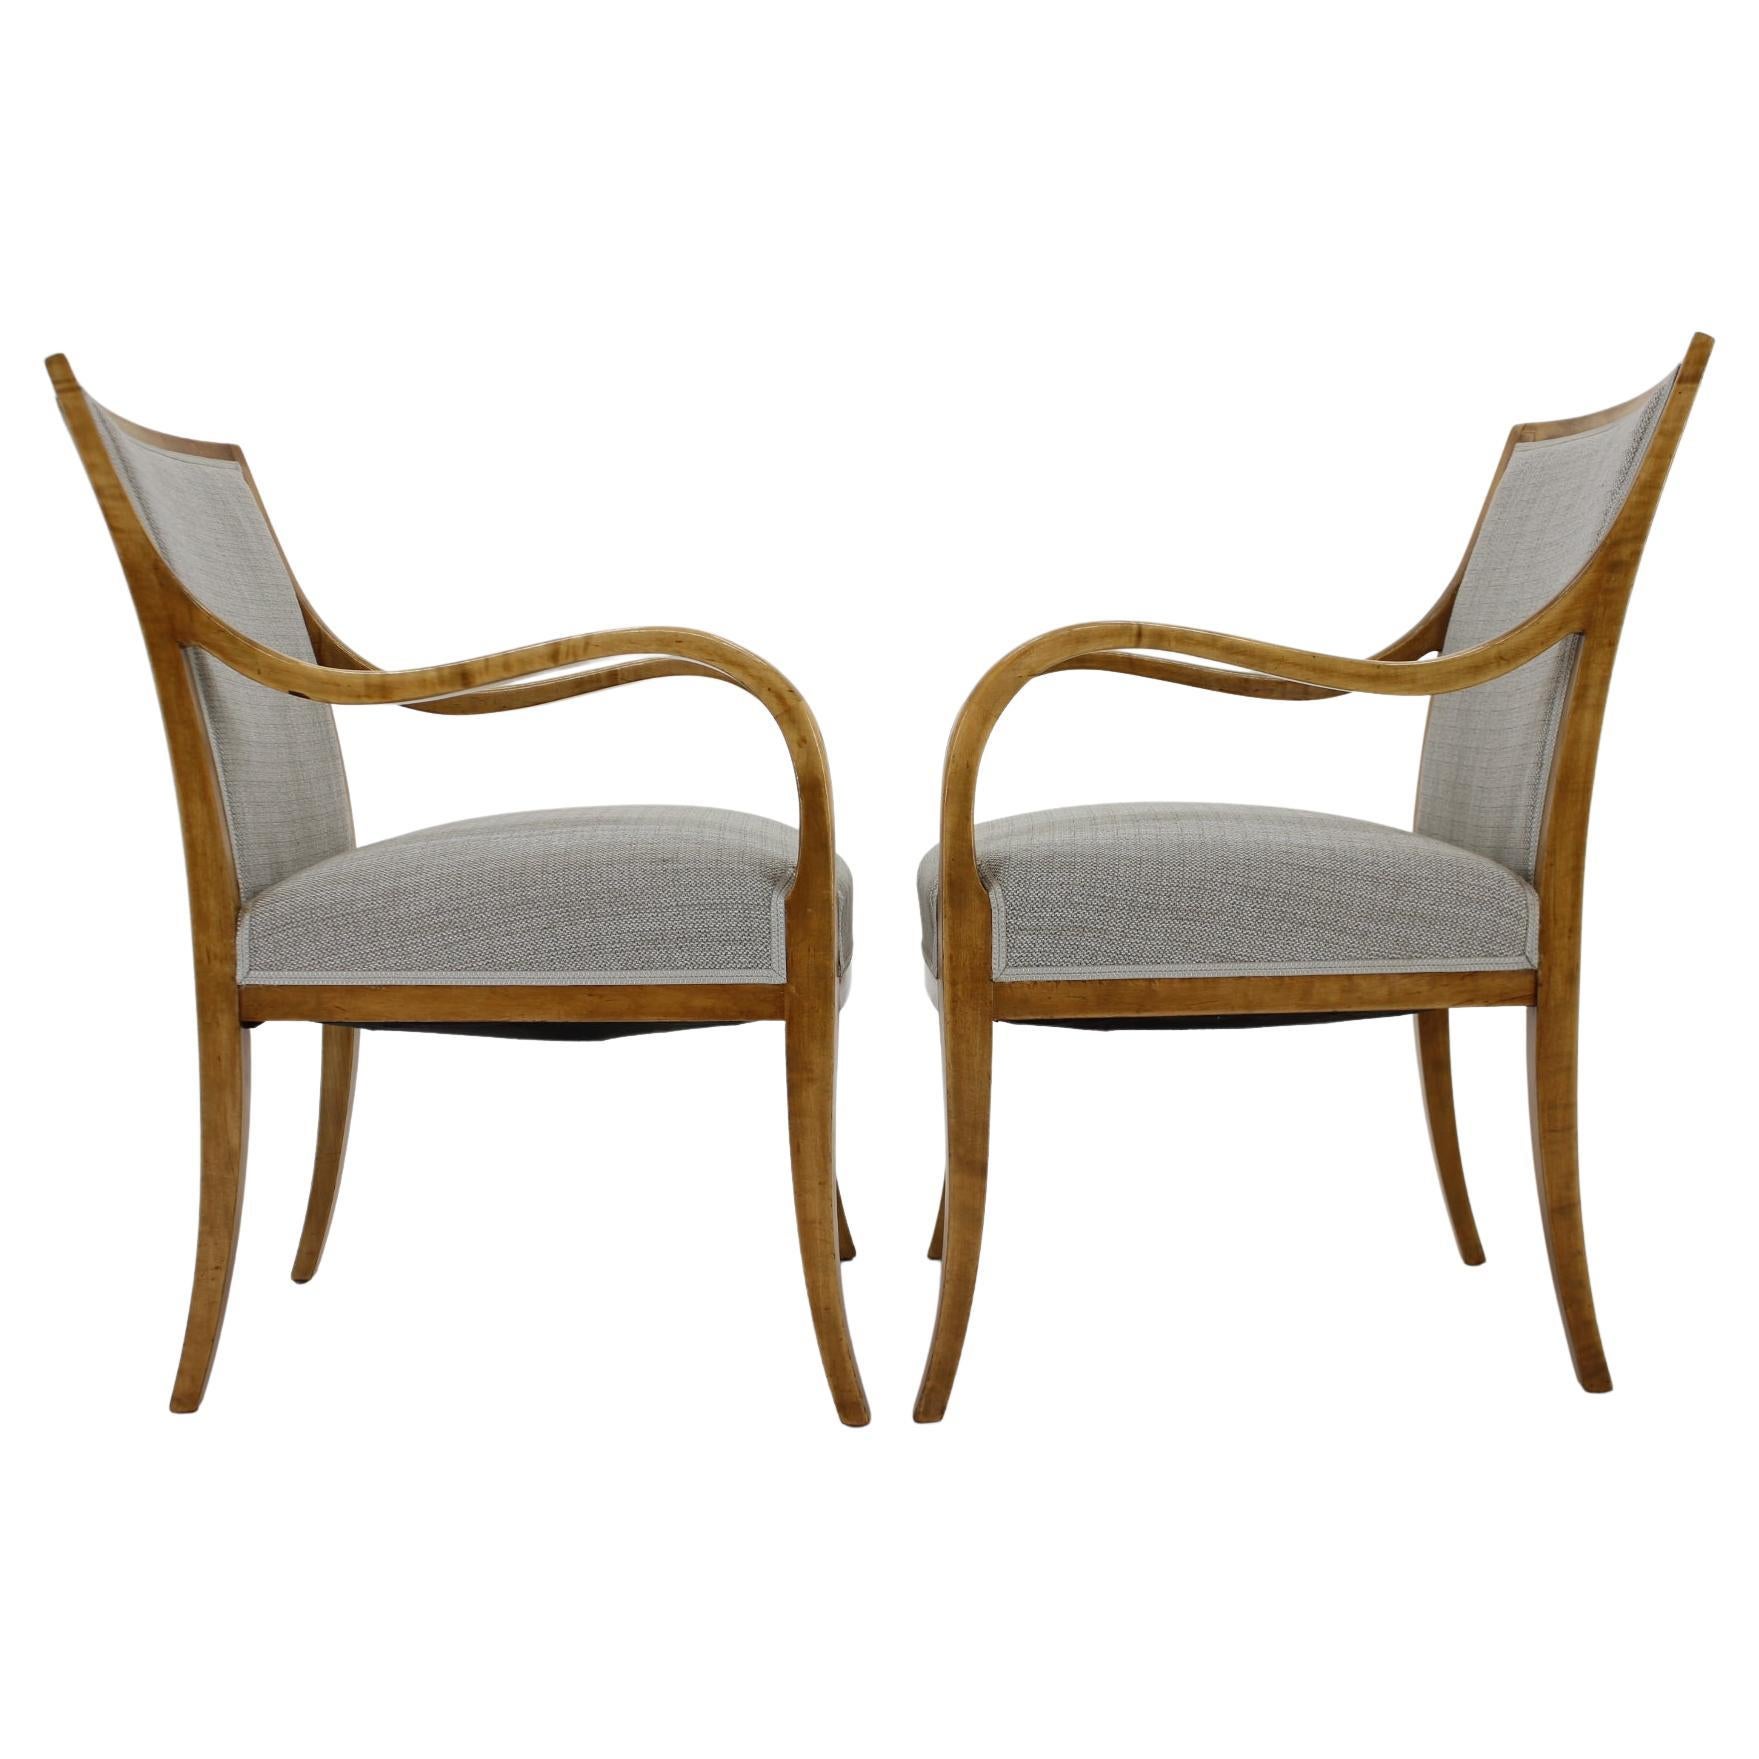 1950s Pair of Frits Henningsen Armchairs in Birch Wood, Denmark For Sale